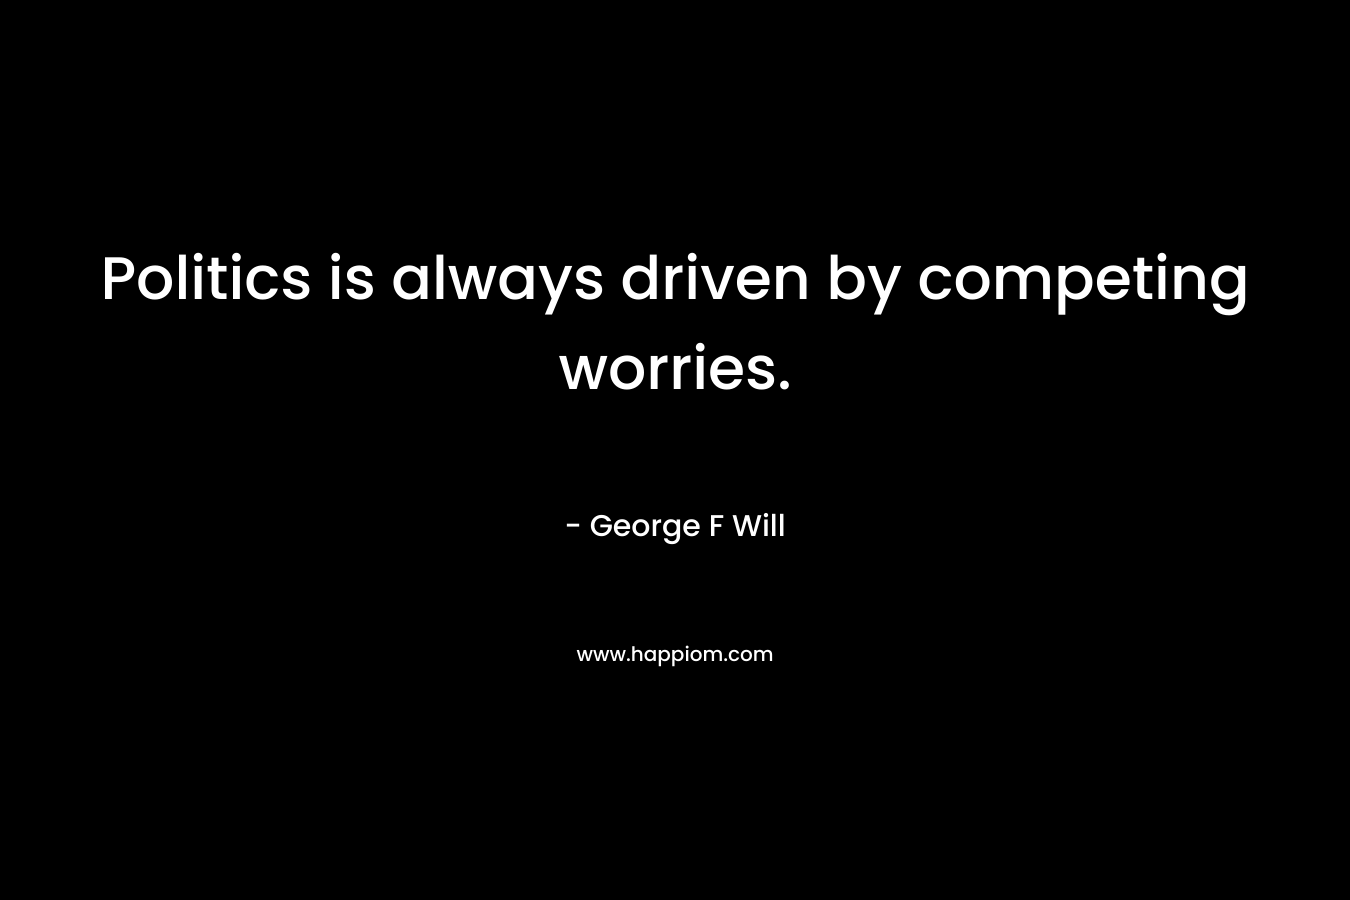 Politics is always driven by competing worries. – George F Will